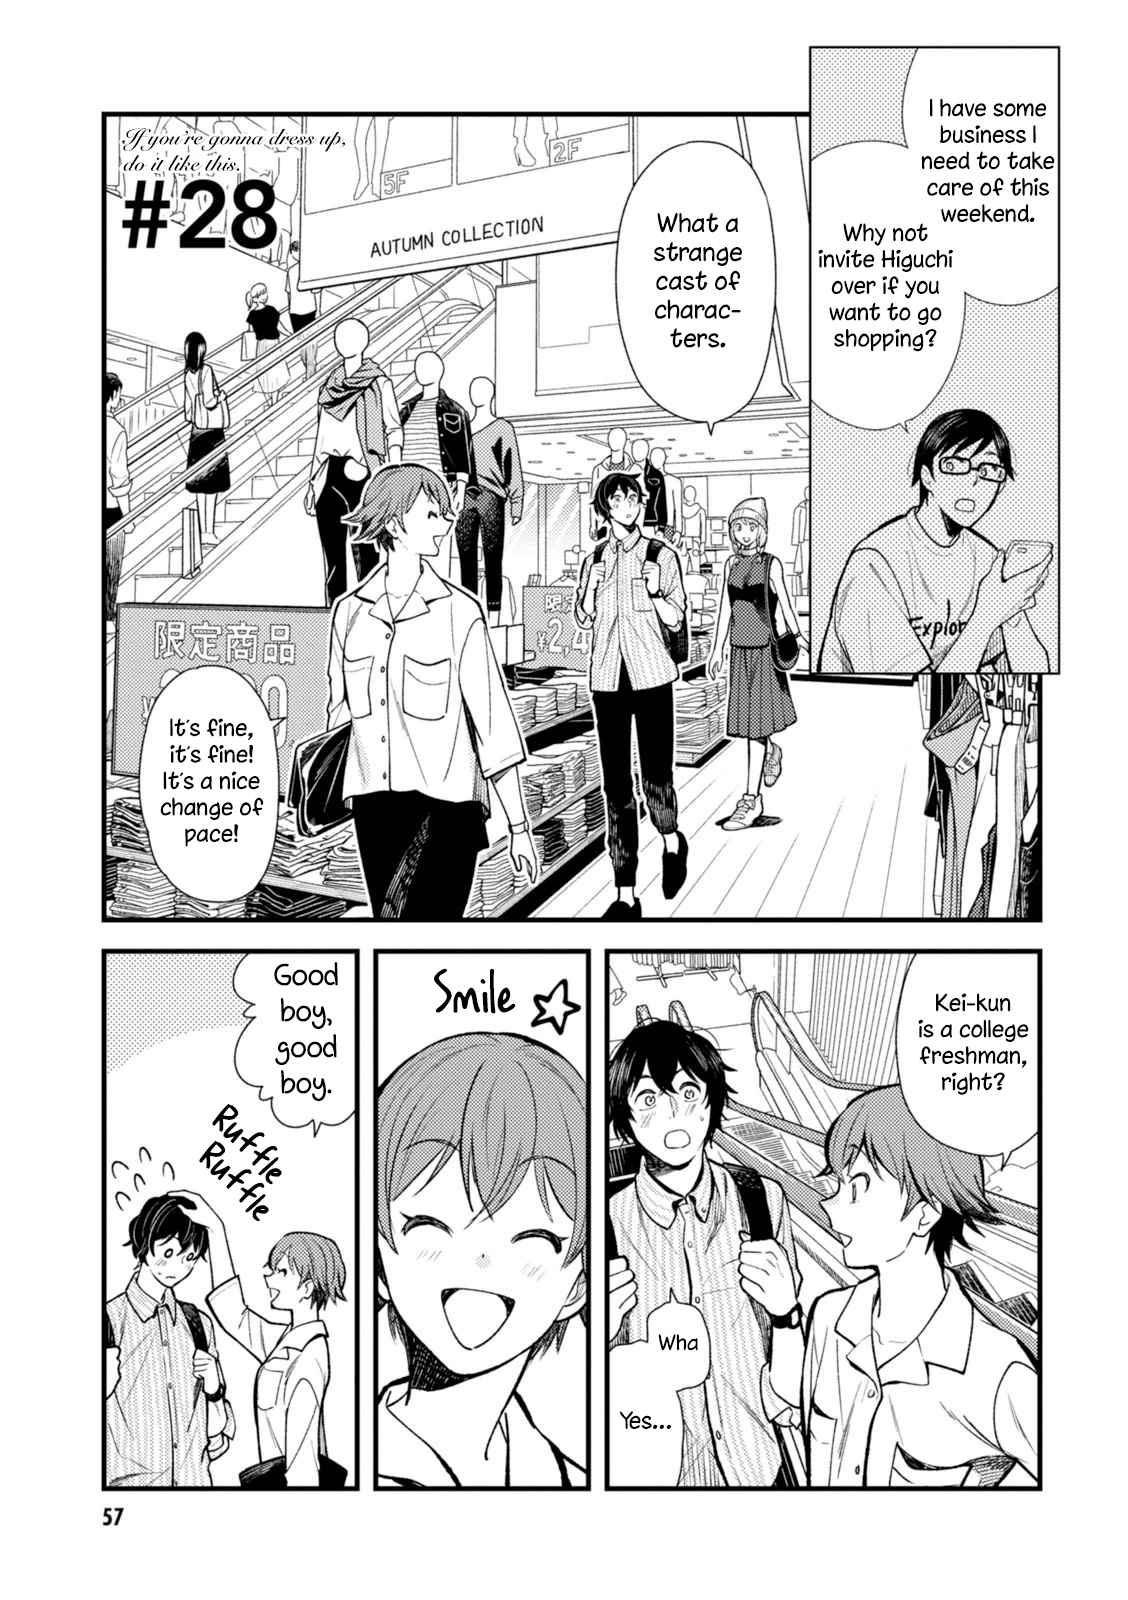 If You're Gonna Dress Up, Do It Like This Vol.4 Ch.28